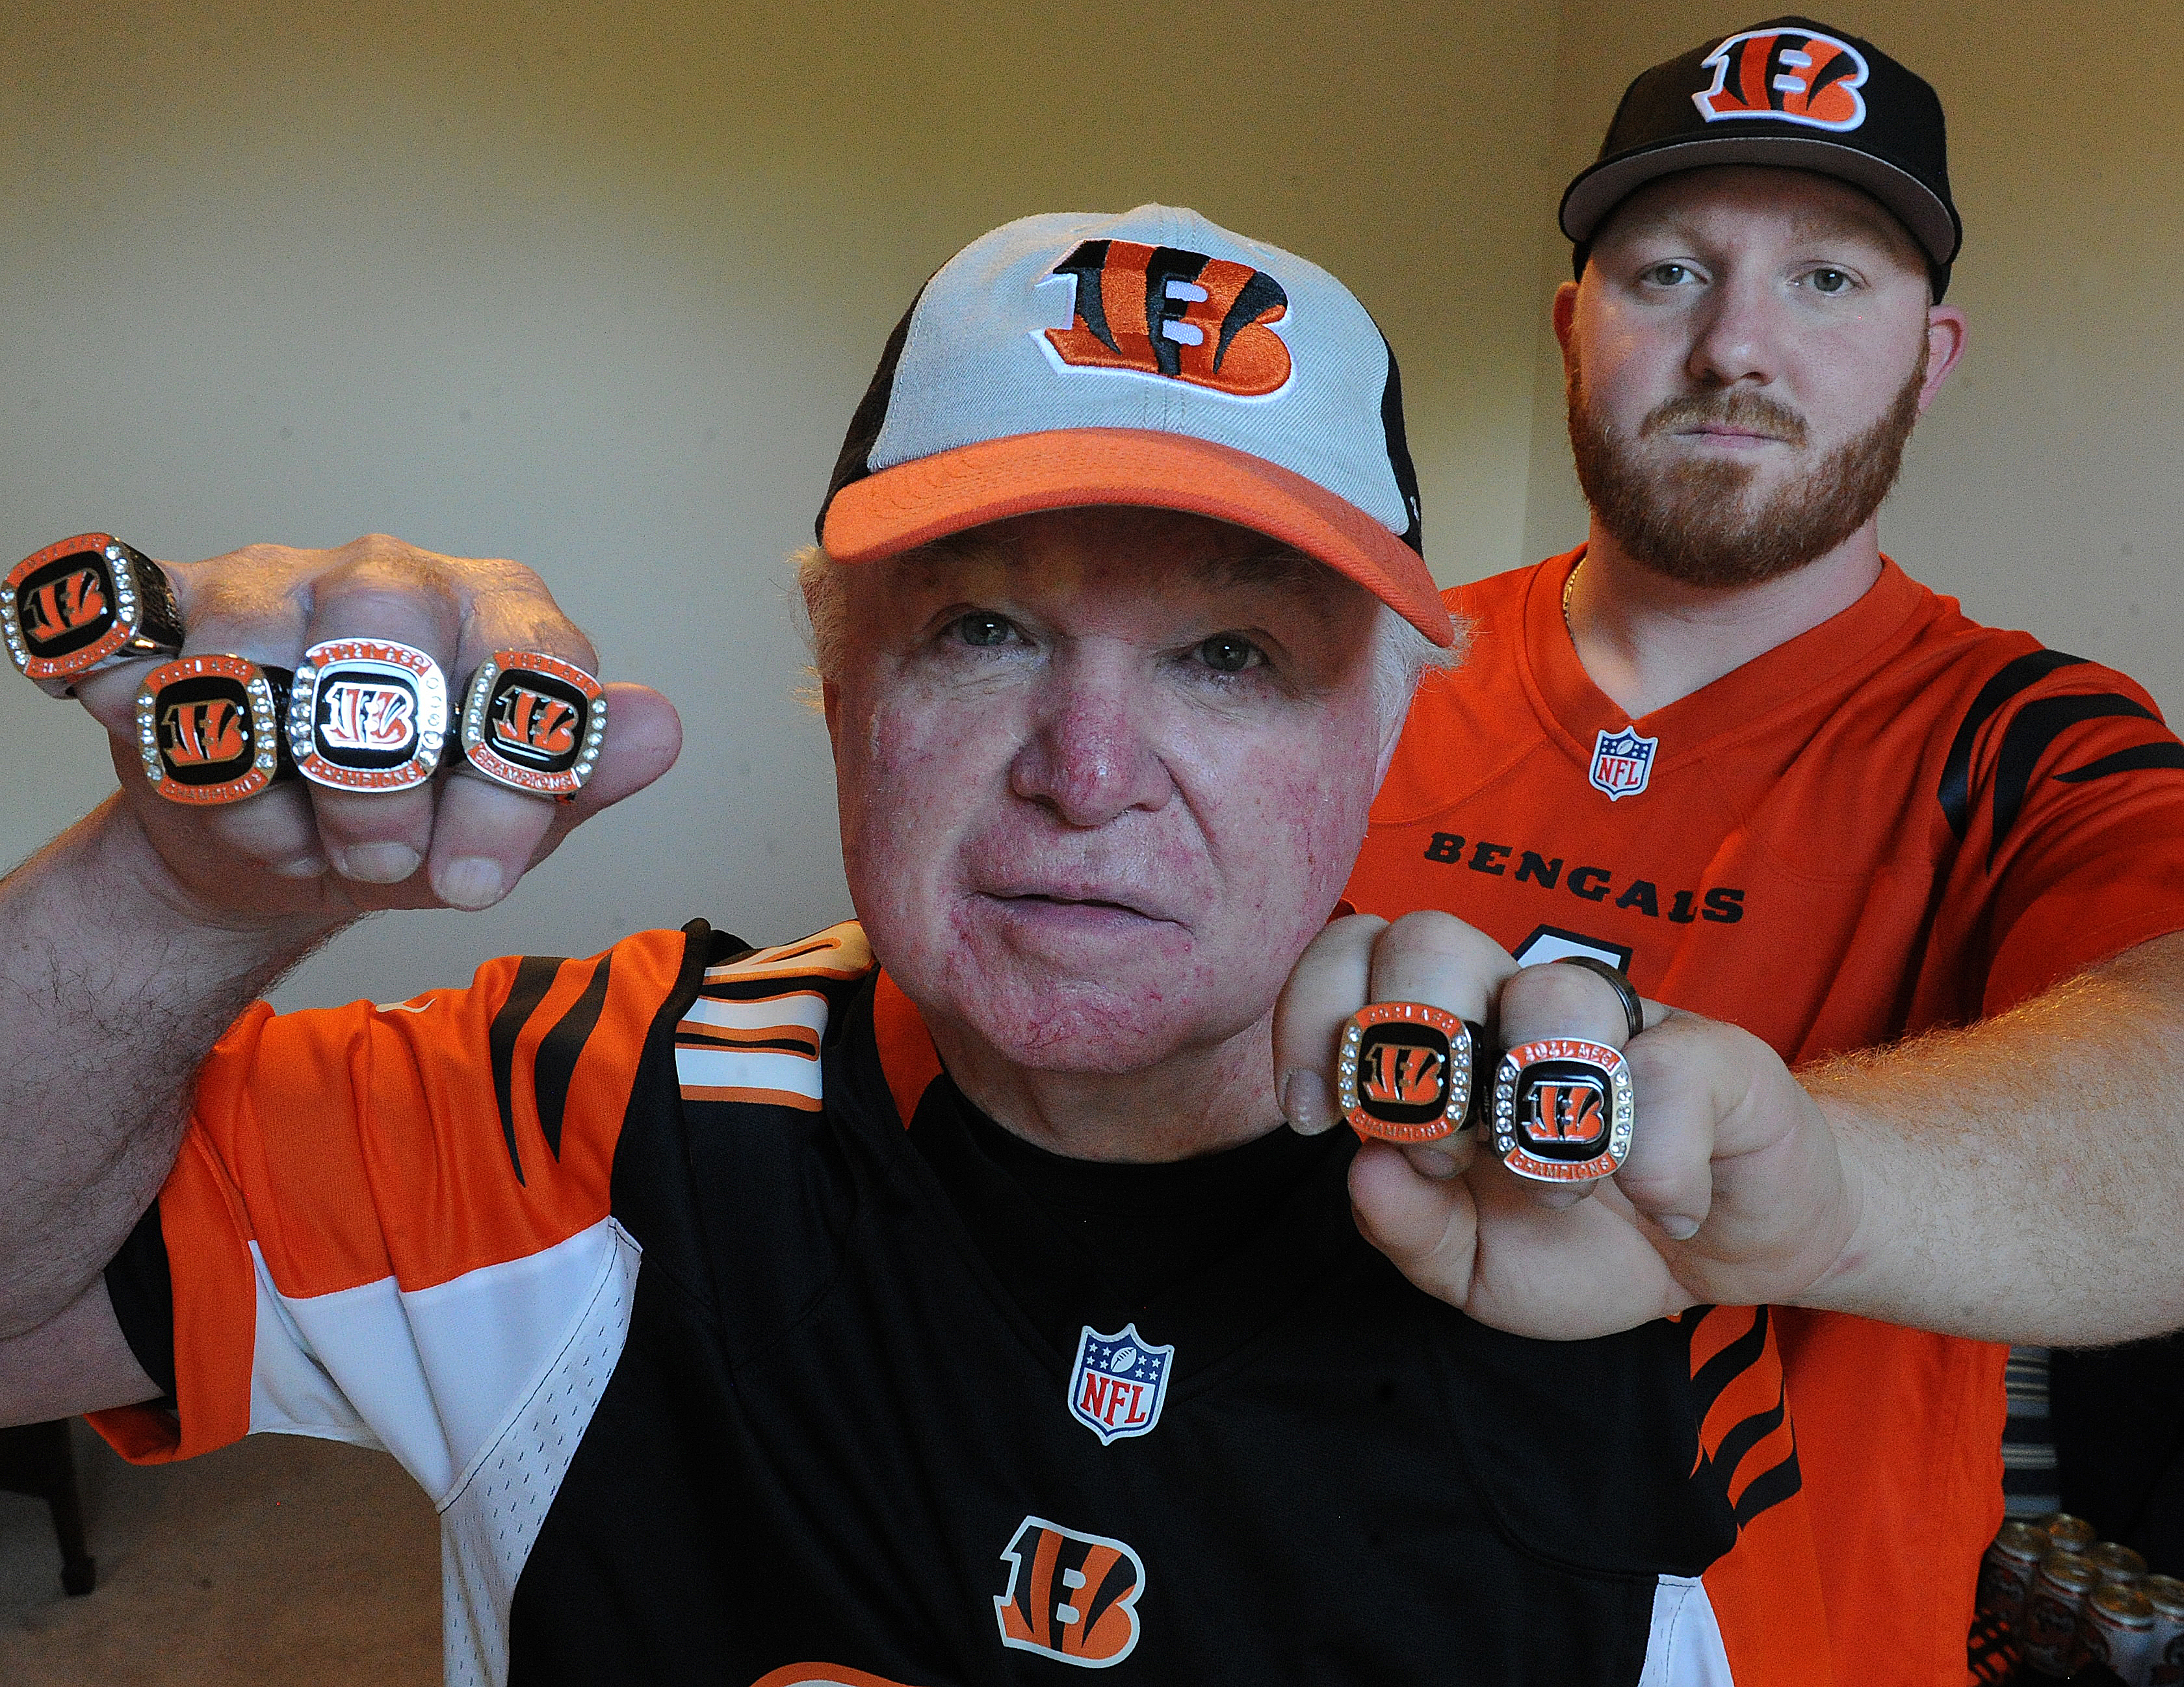 Bengals fans, businesses excited for new season; fans eyeing